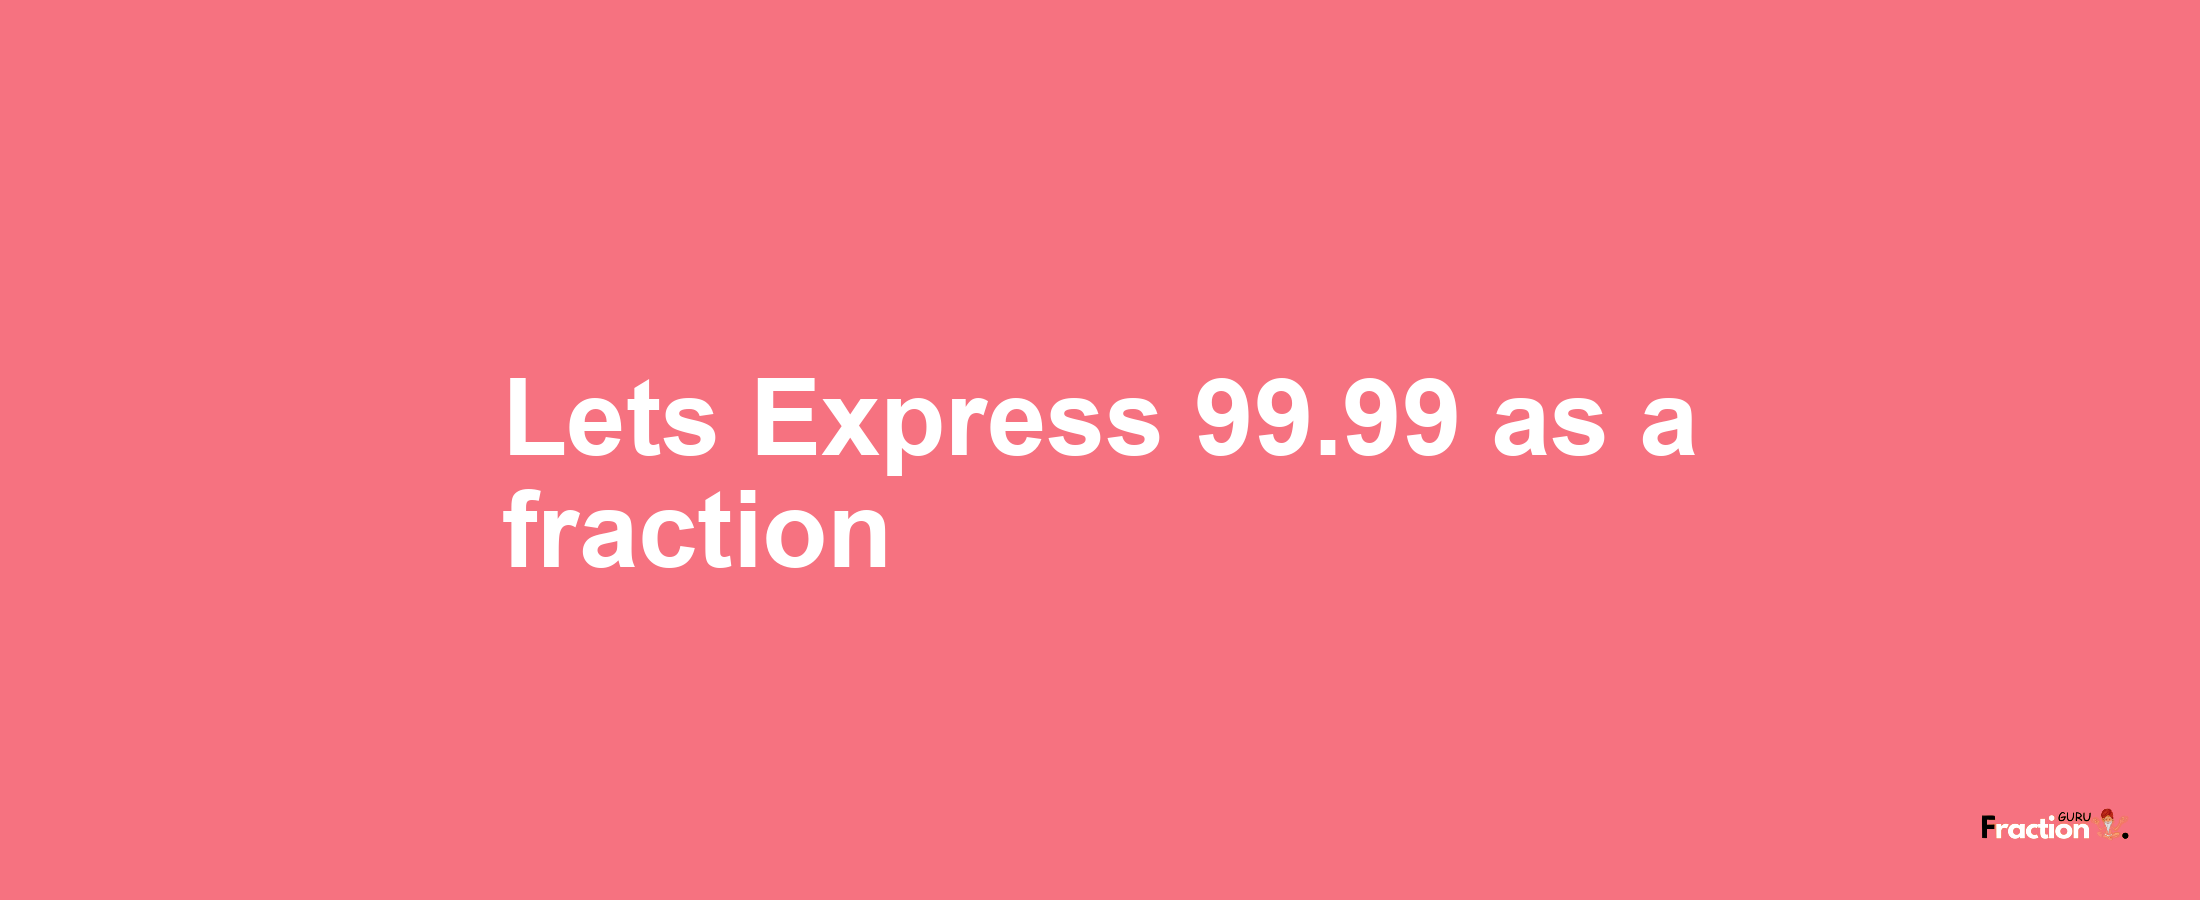 Lets Express 99.99 as afraction